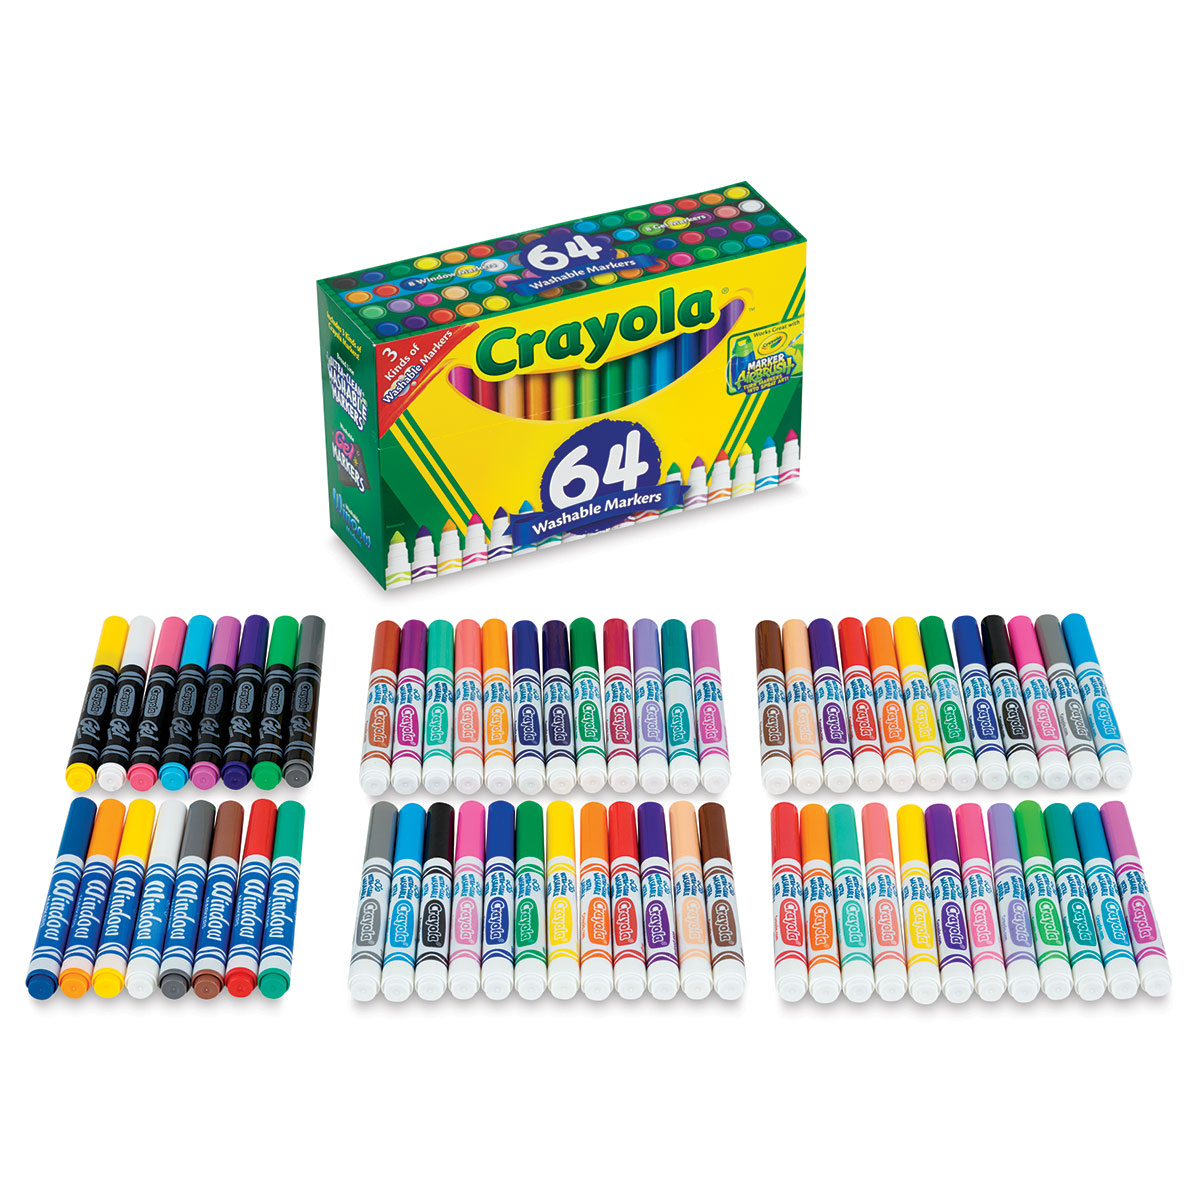 Crayola Pip-Squeaks Skinnies Washable Markers - 64 markers